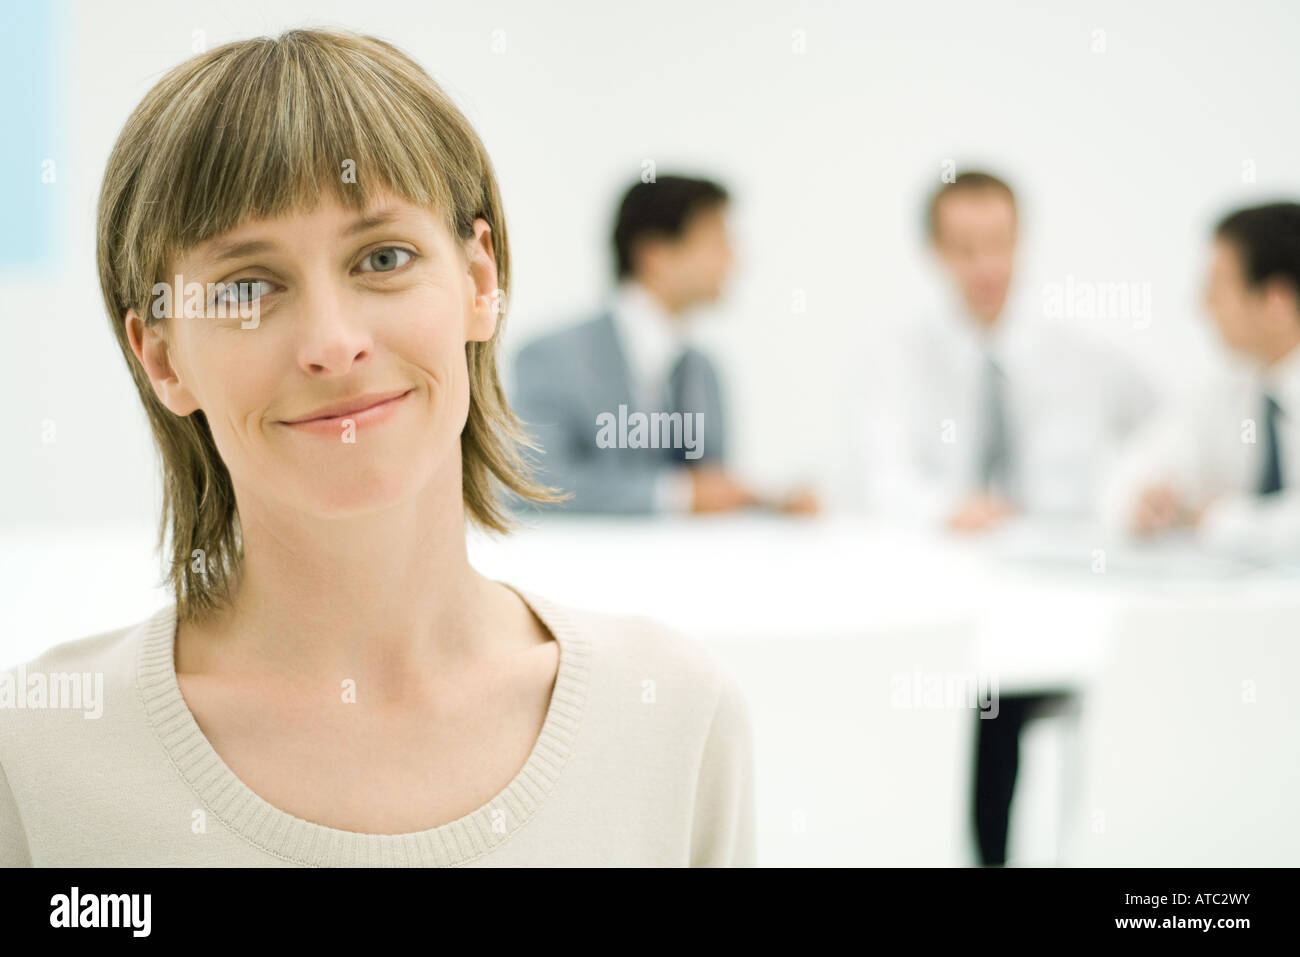 Businesswoman smiling at camera, portrait, businessmen in background Stock Photo